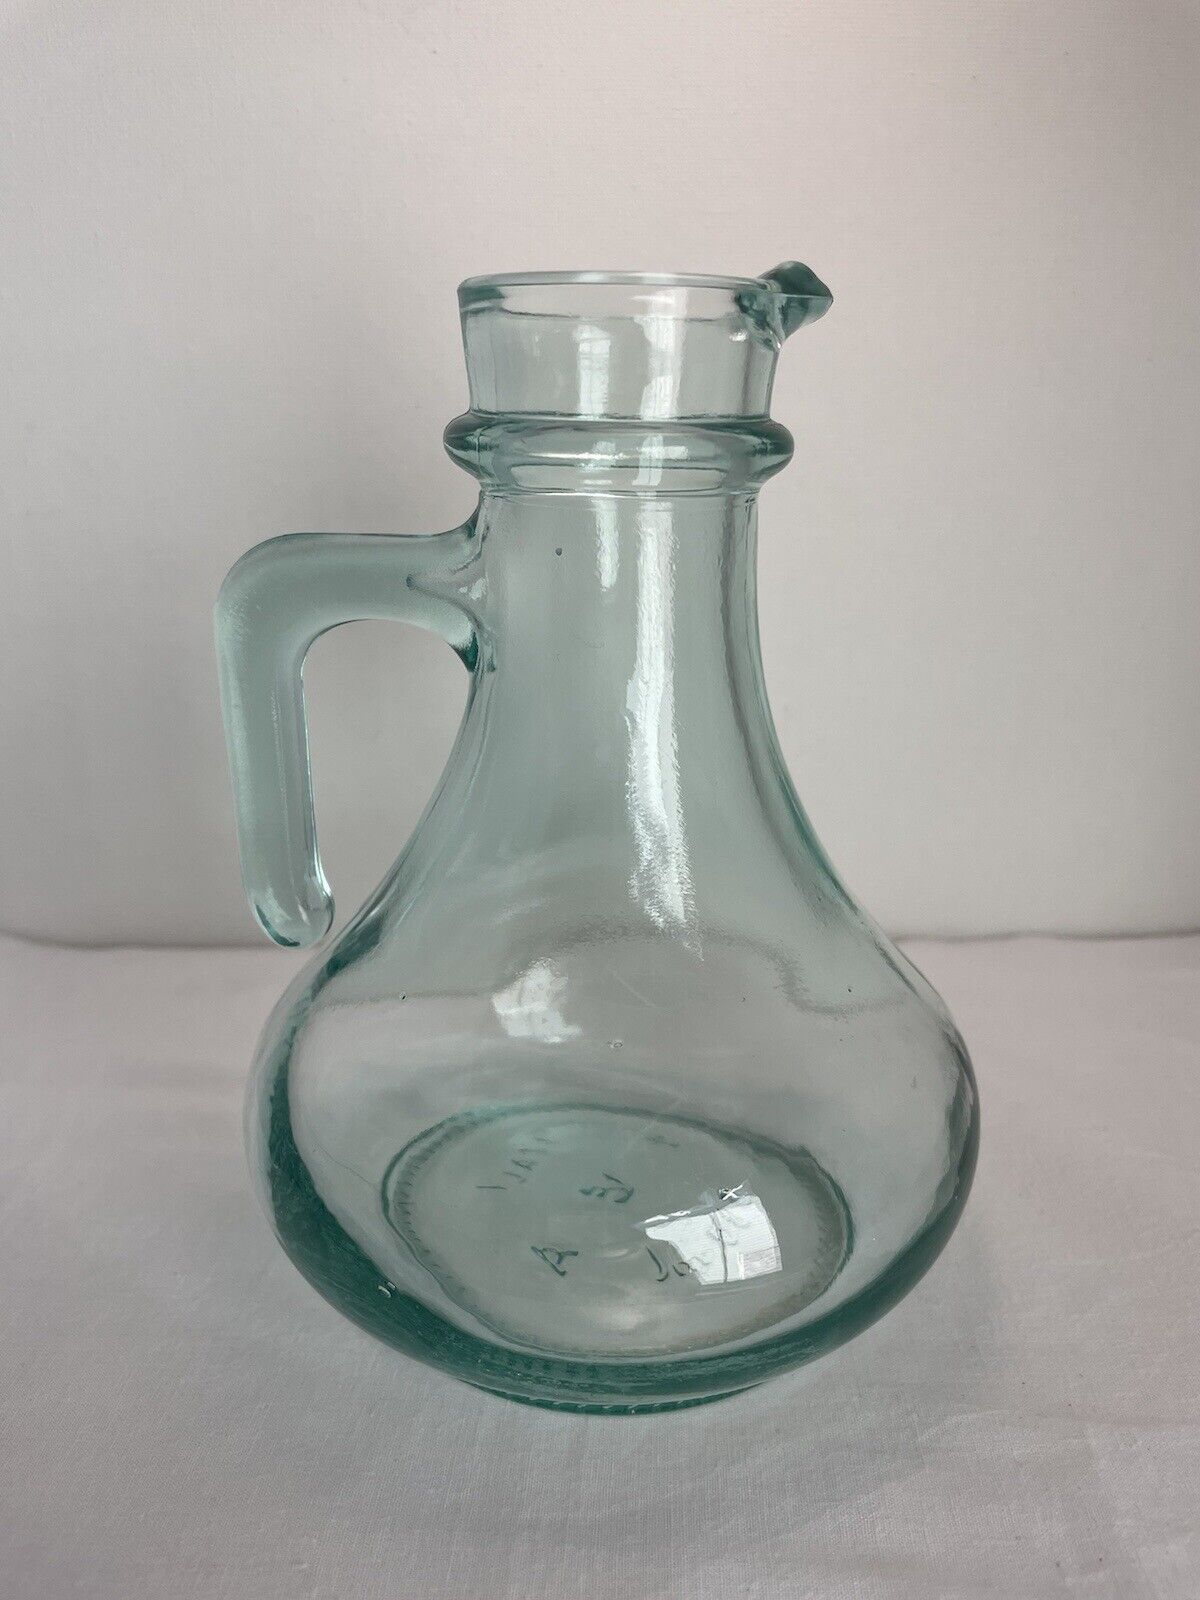 Vintage Style Green Glass Pitcher with L-Shaped Handle - Made in Italy